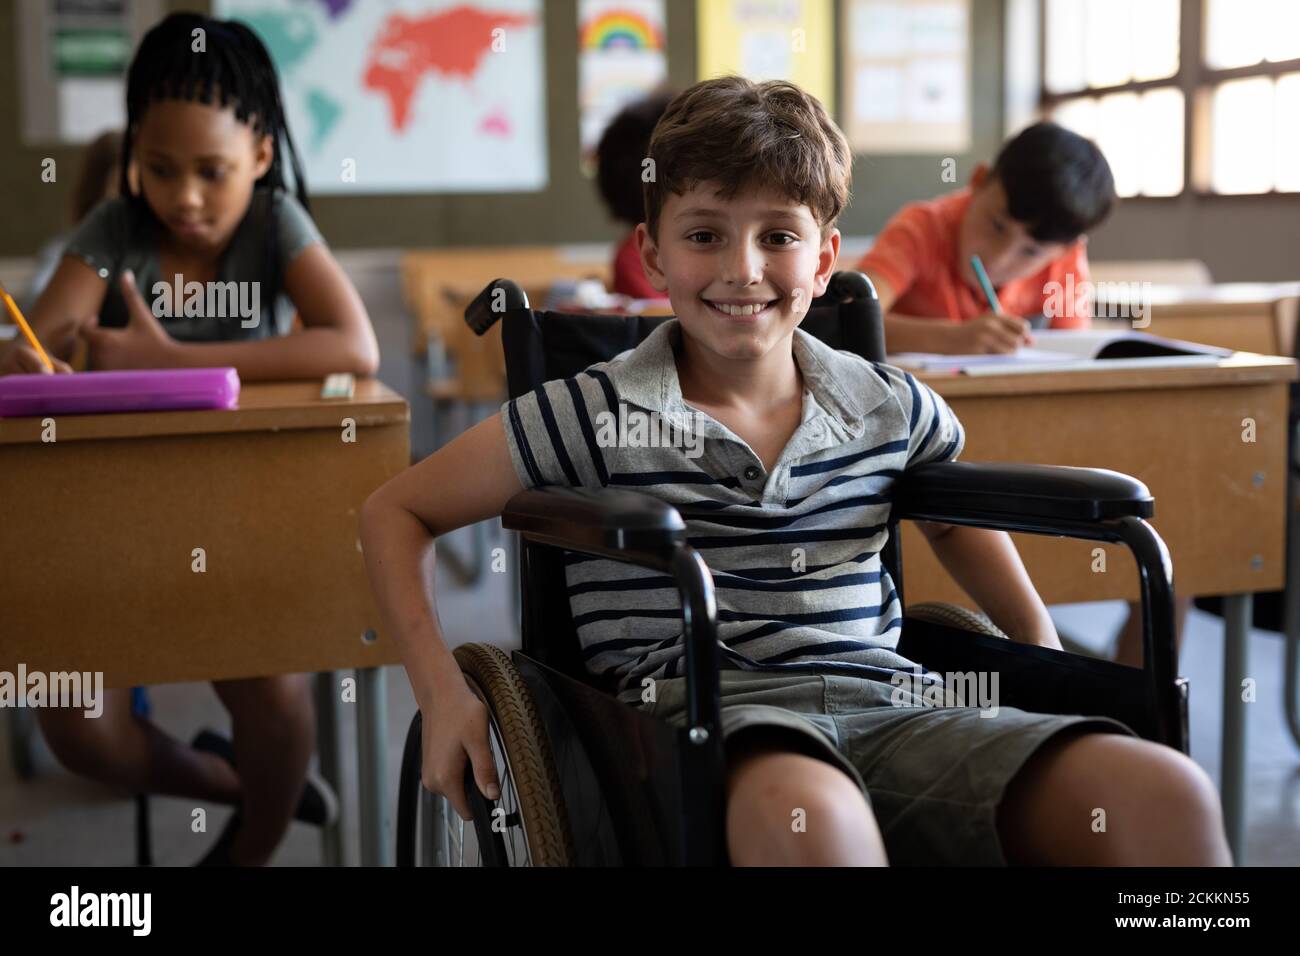 Portrait of disable boy smiling while sitting in his wheelchair in class at school Stock Photo